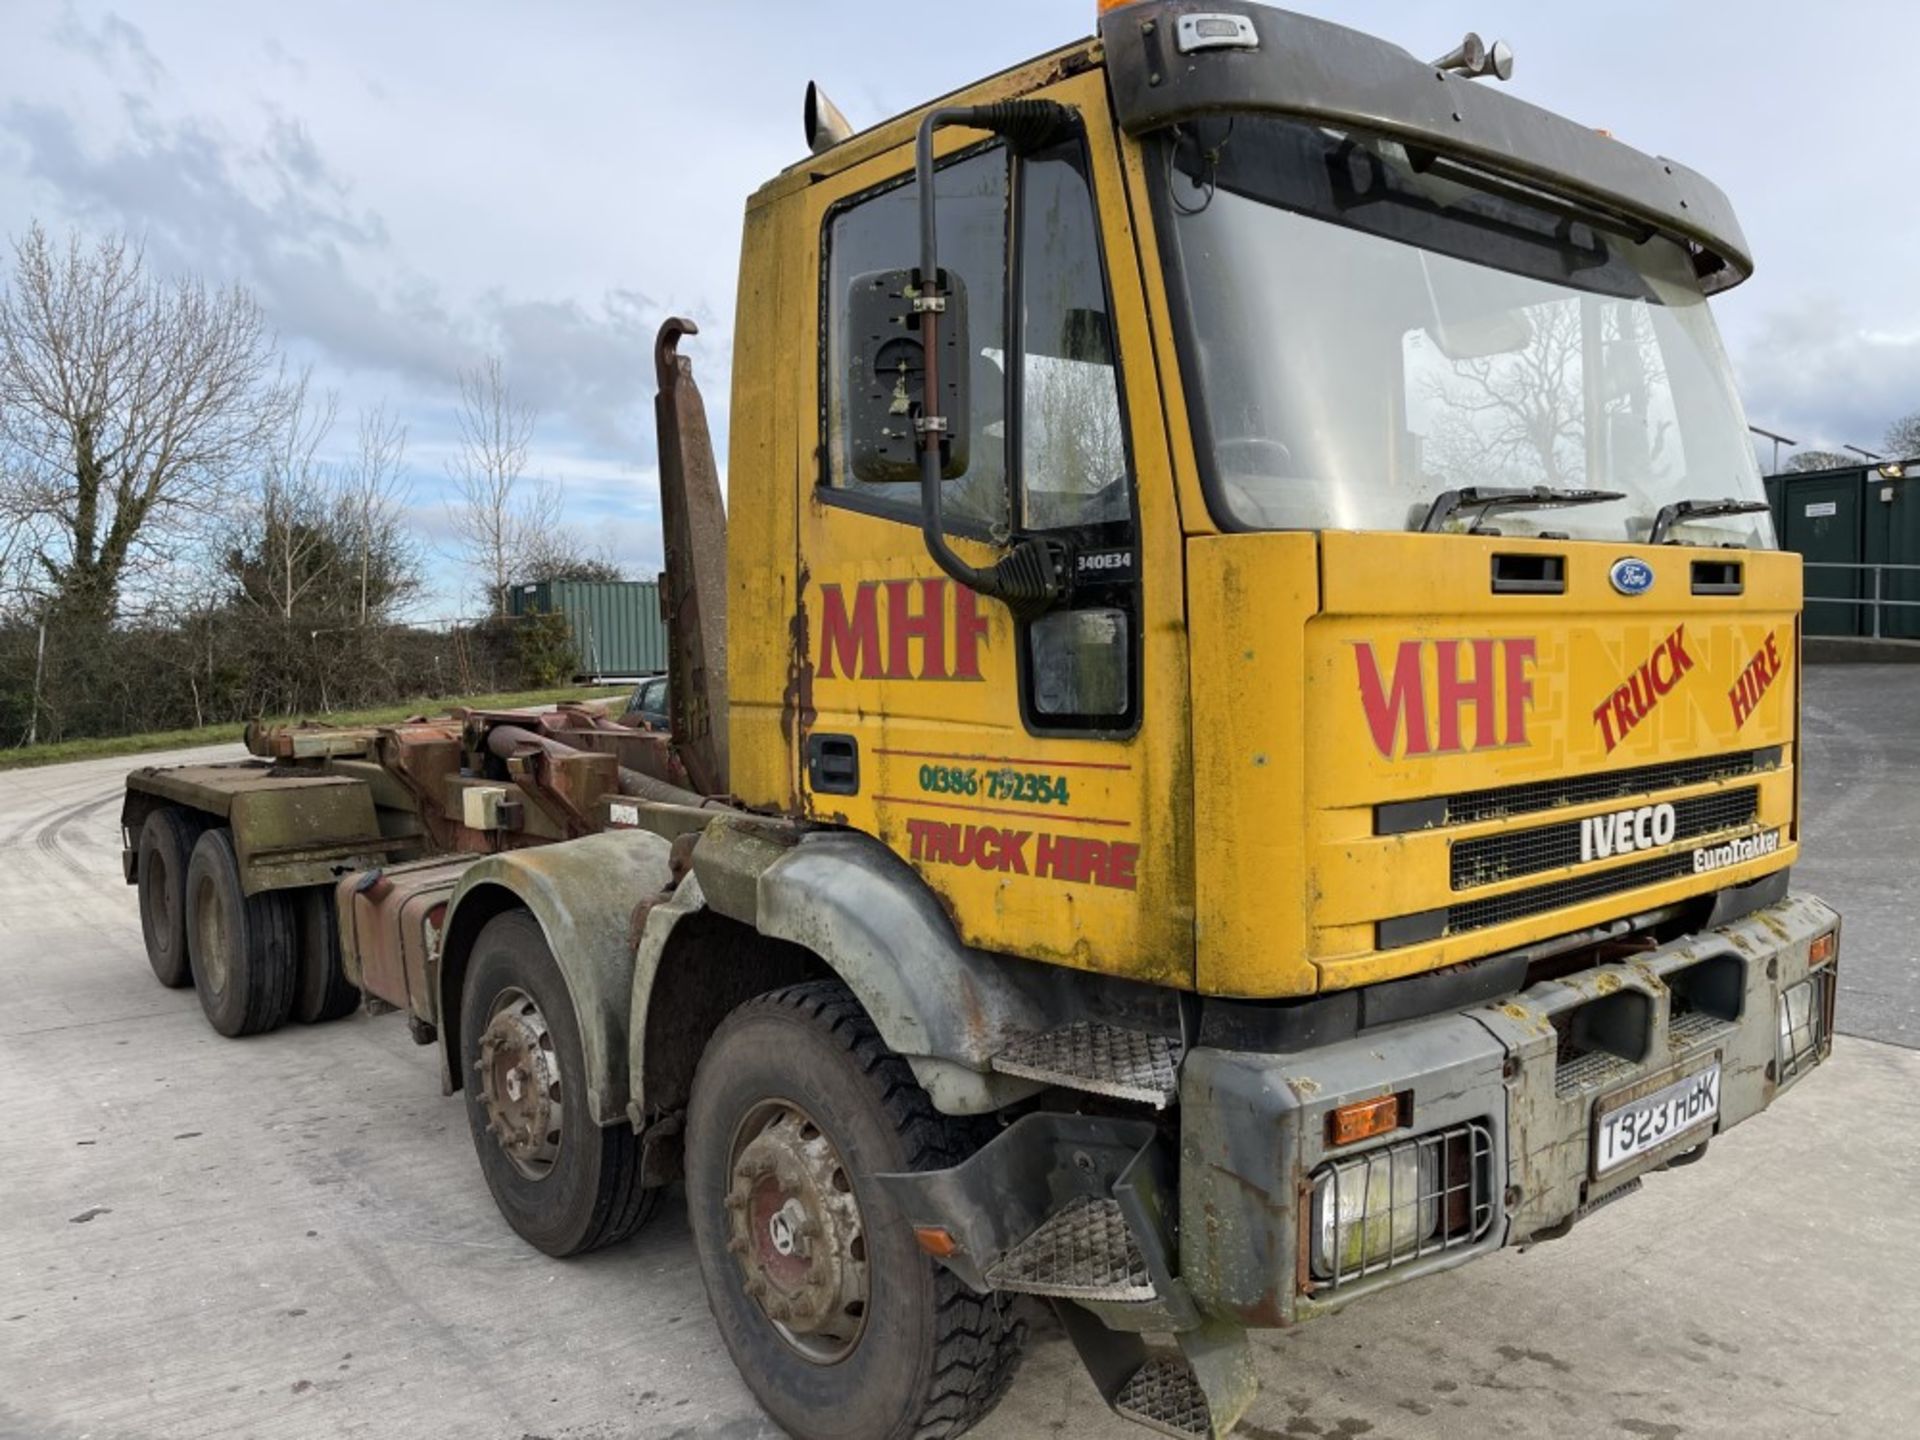 T reg IVECO 340 E34 8 WHEEL HOOK LOADER (DIRECT COUNCIL) (LOCATION ANGLESEY) 1ST REG 06/99, V5 MAY - Bild 2 aus 7